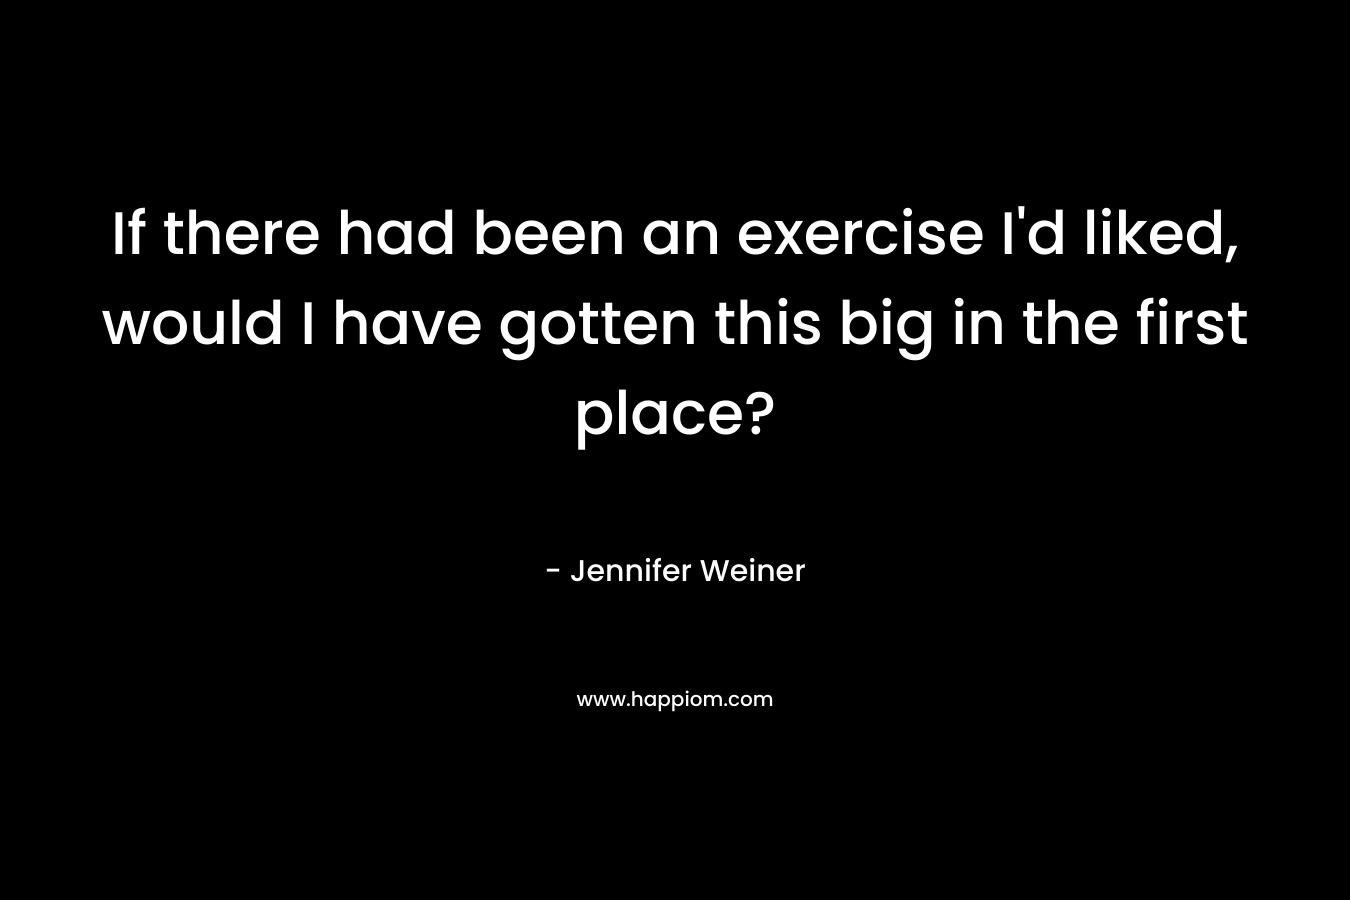 If there had been an exercise I’d liked, would I have gotten this big in the first place? – Jennifer Weiner